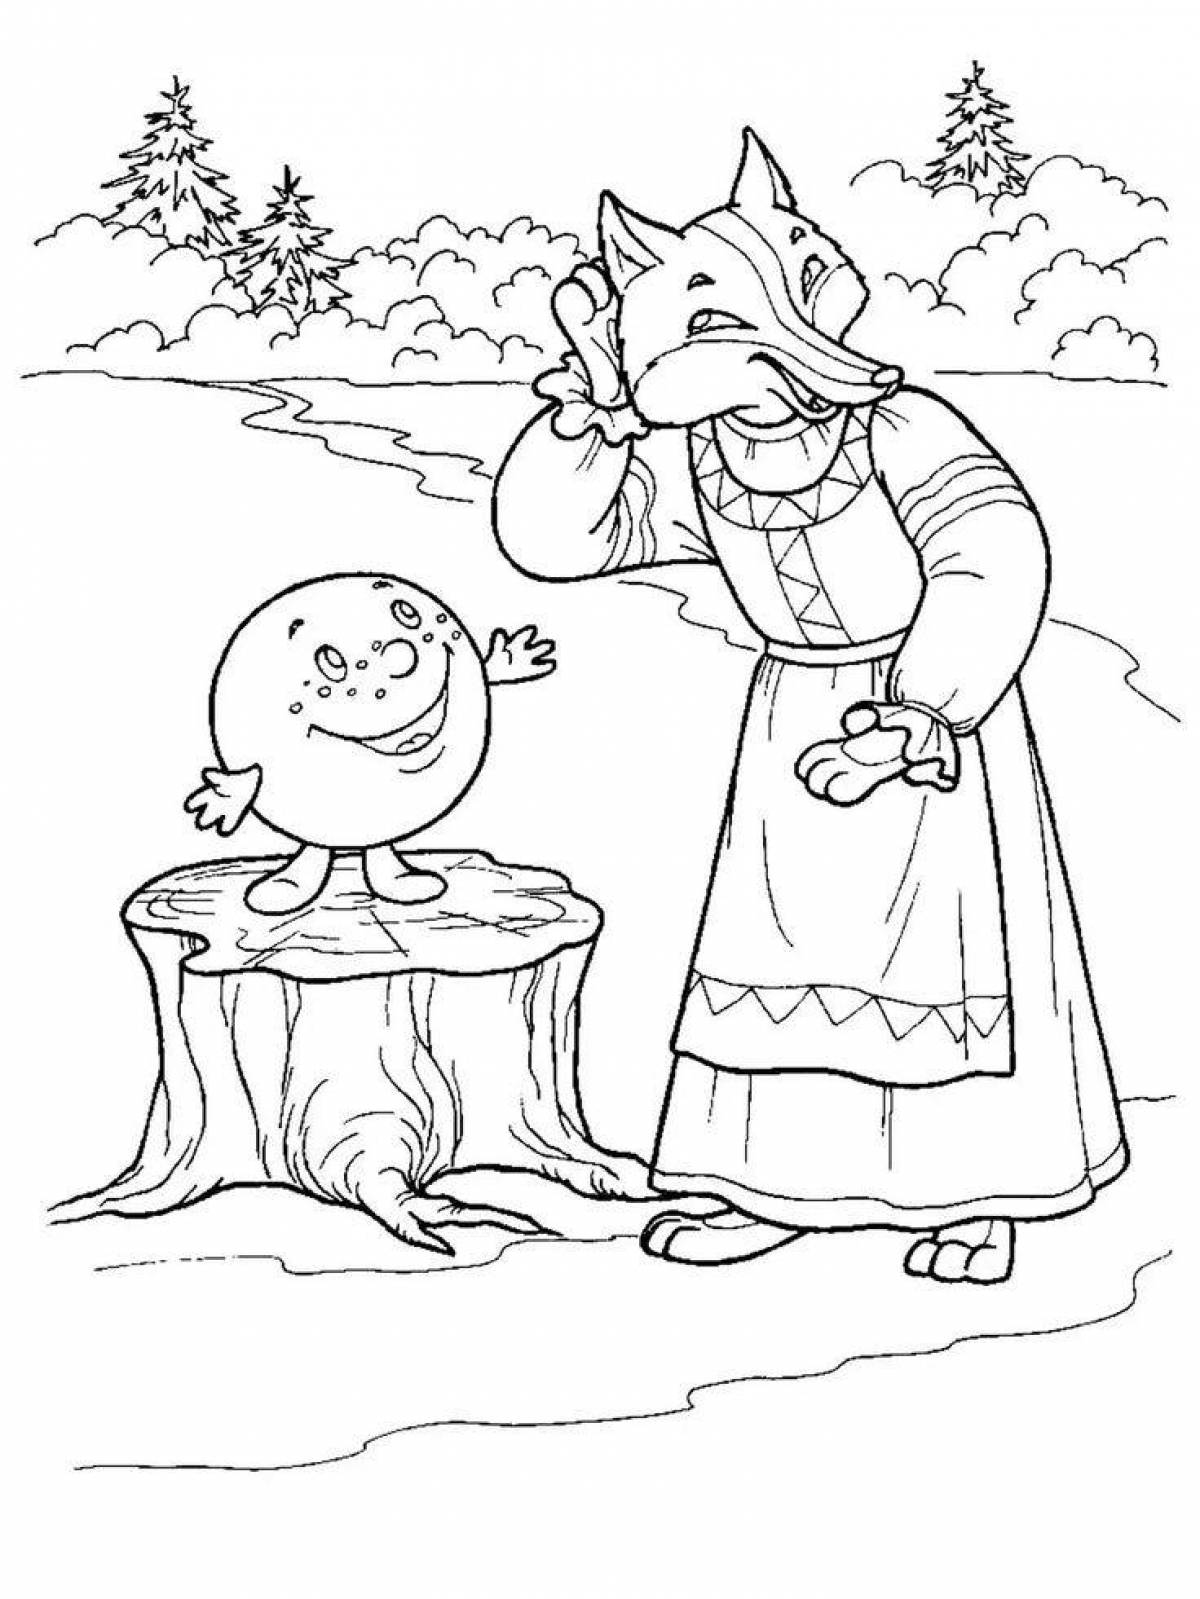 Surreal fairy tale coloring pages